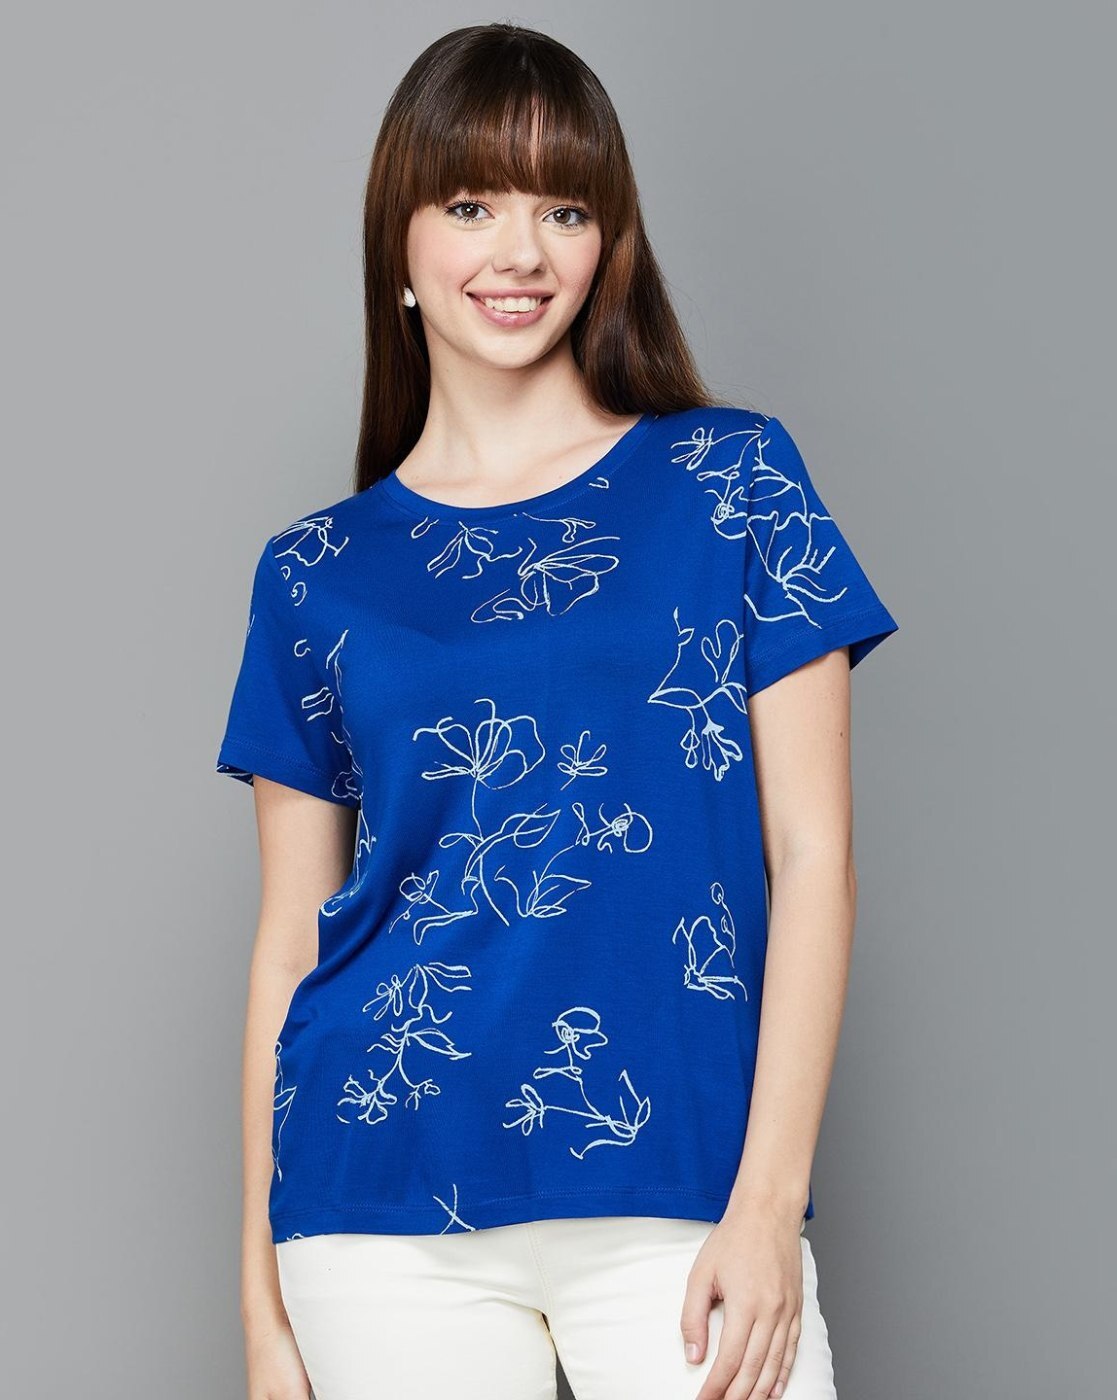 Buy Blue Tshirts for Women by COLOUR ME Online